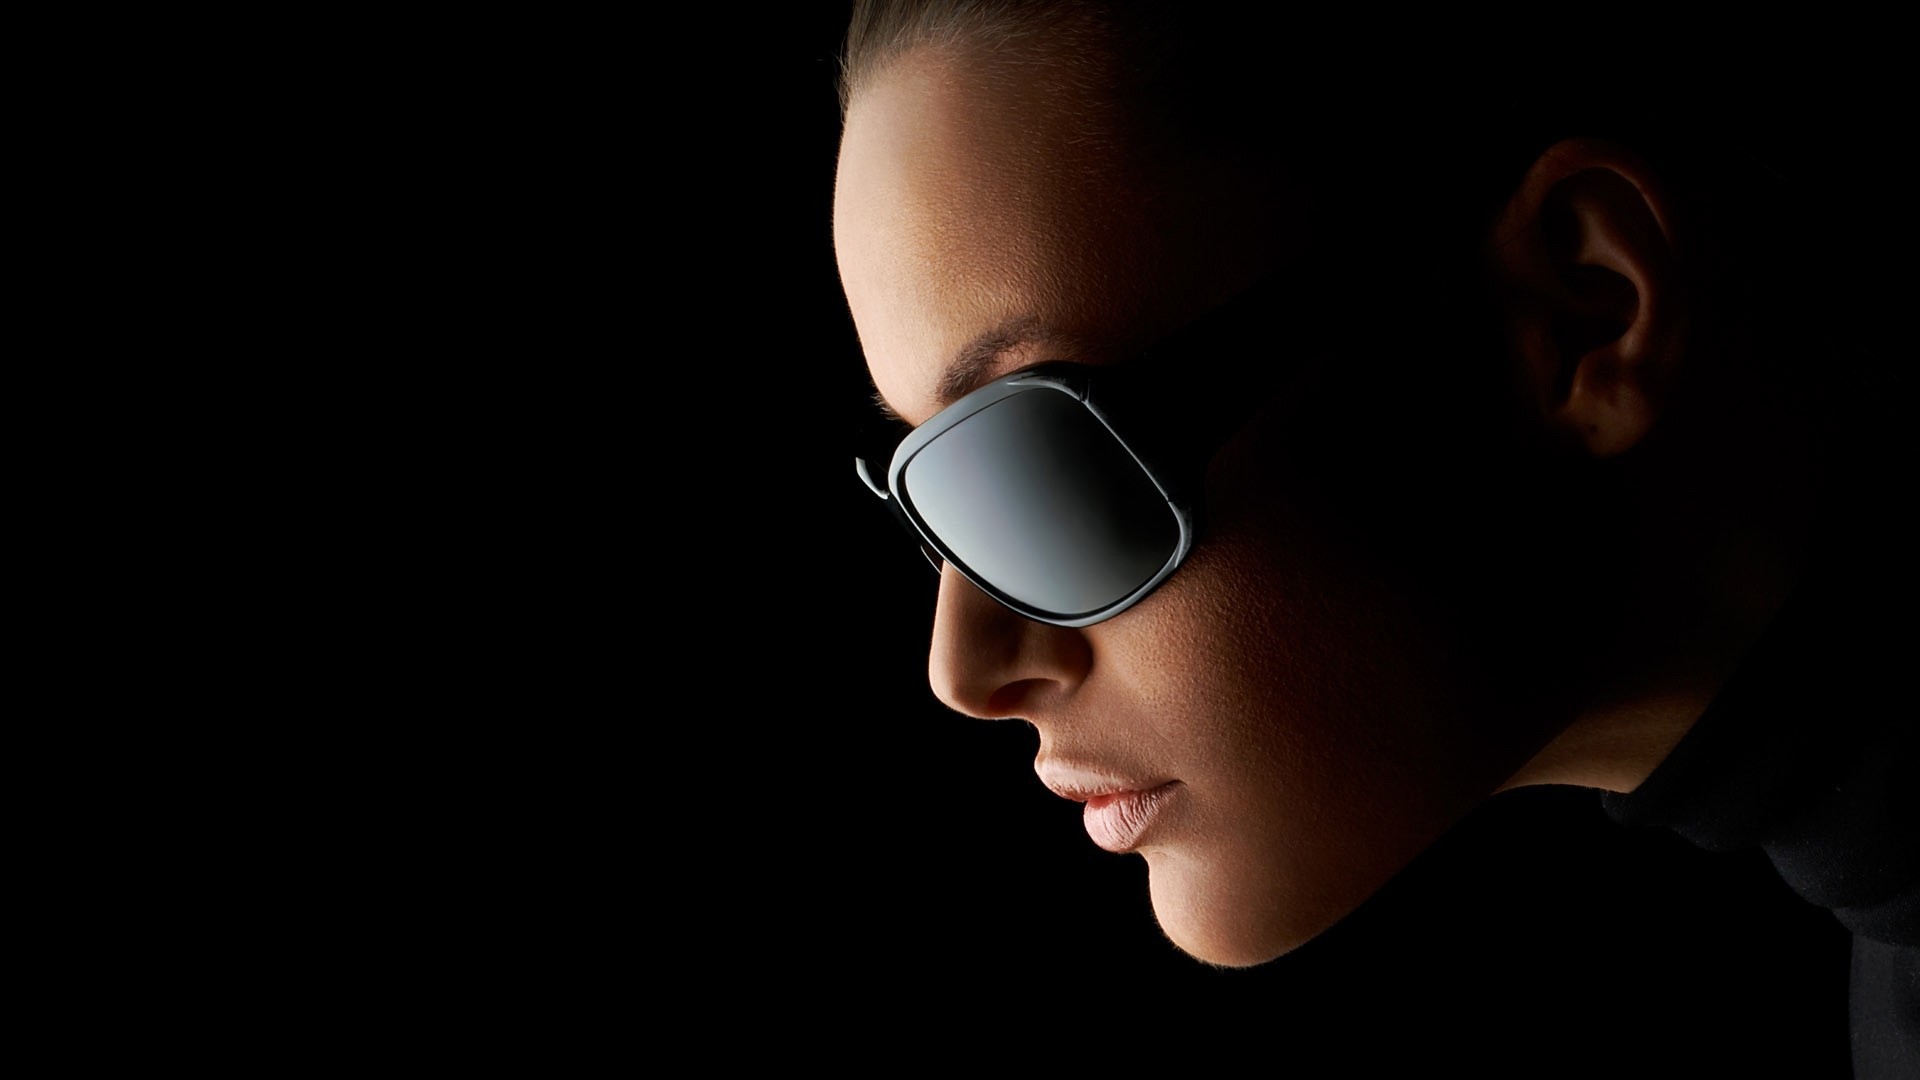 People 1920x1080 women with shades sunglasses model simple background women black background closeup profile face